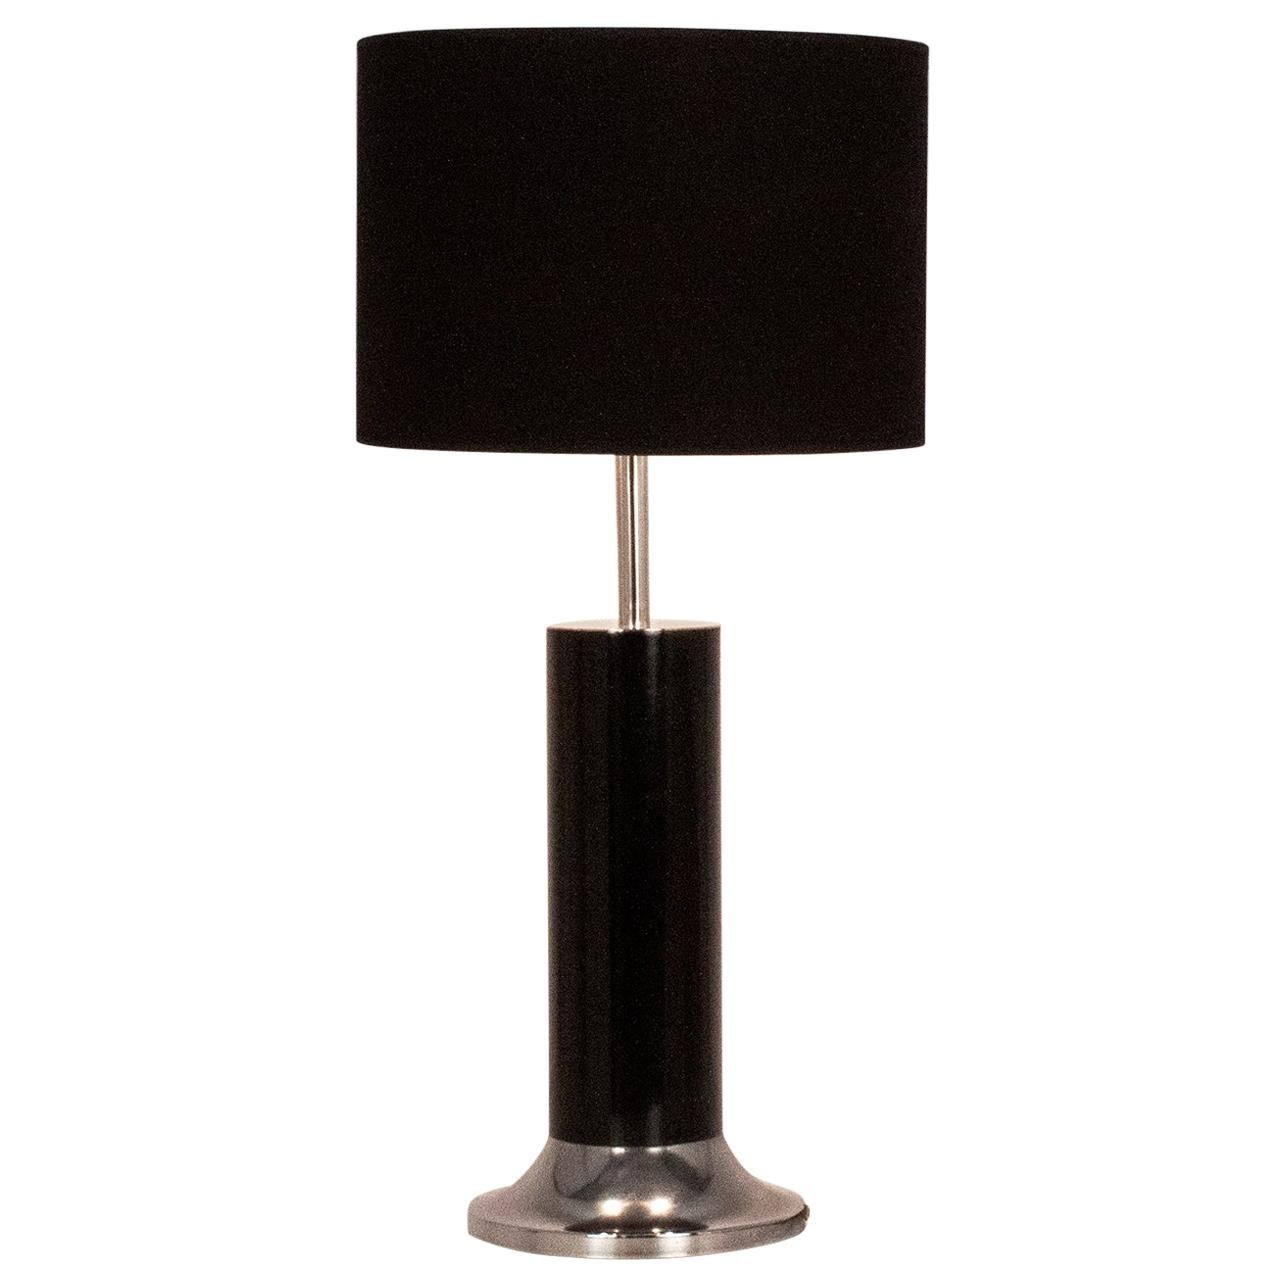 Large Reggiani Table Lamp Chrome and Black Enameled Metal, 1970s For Sale